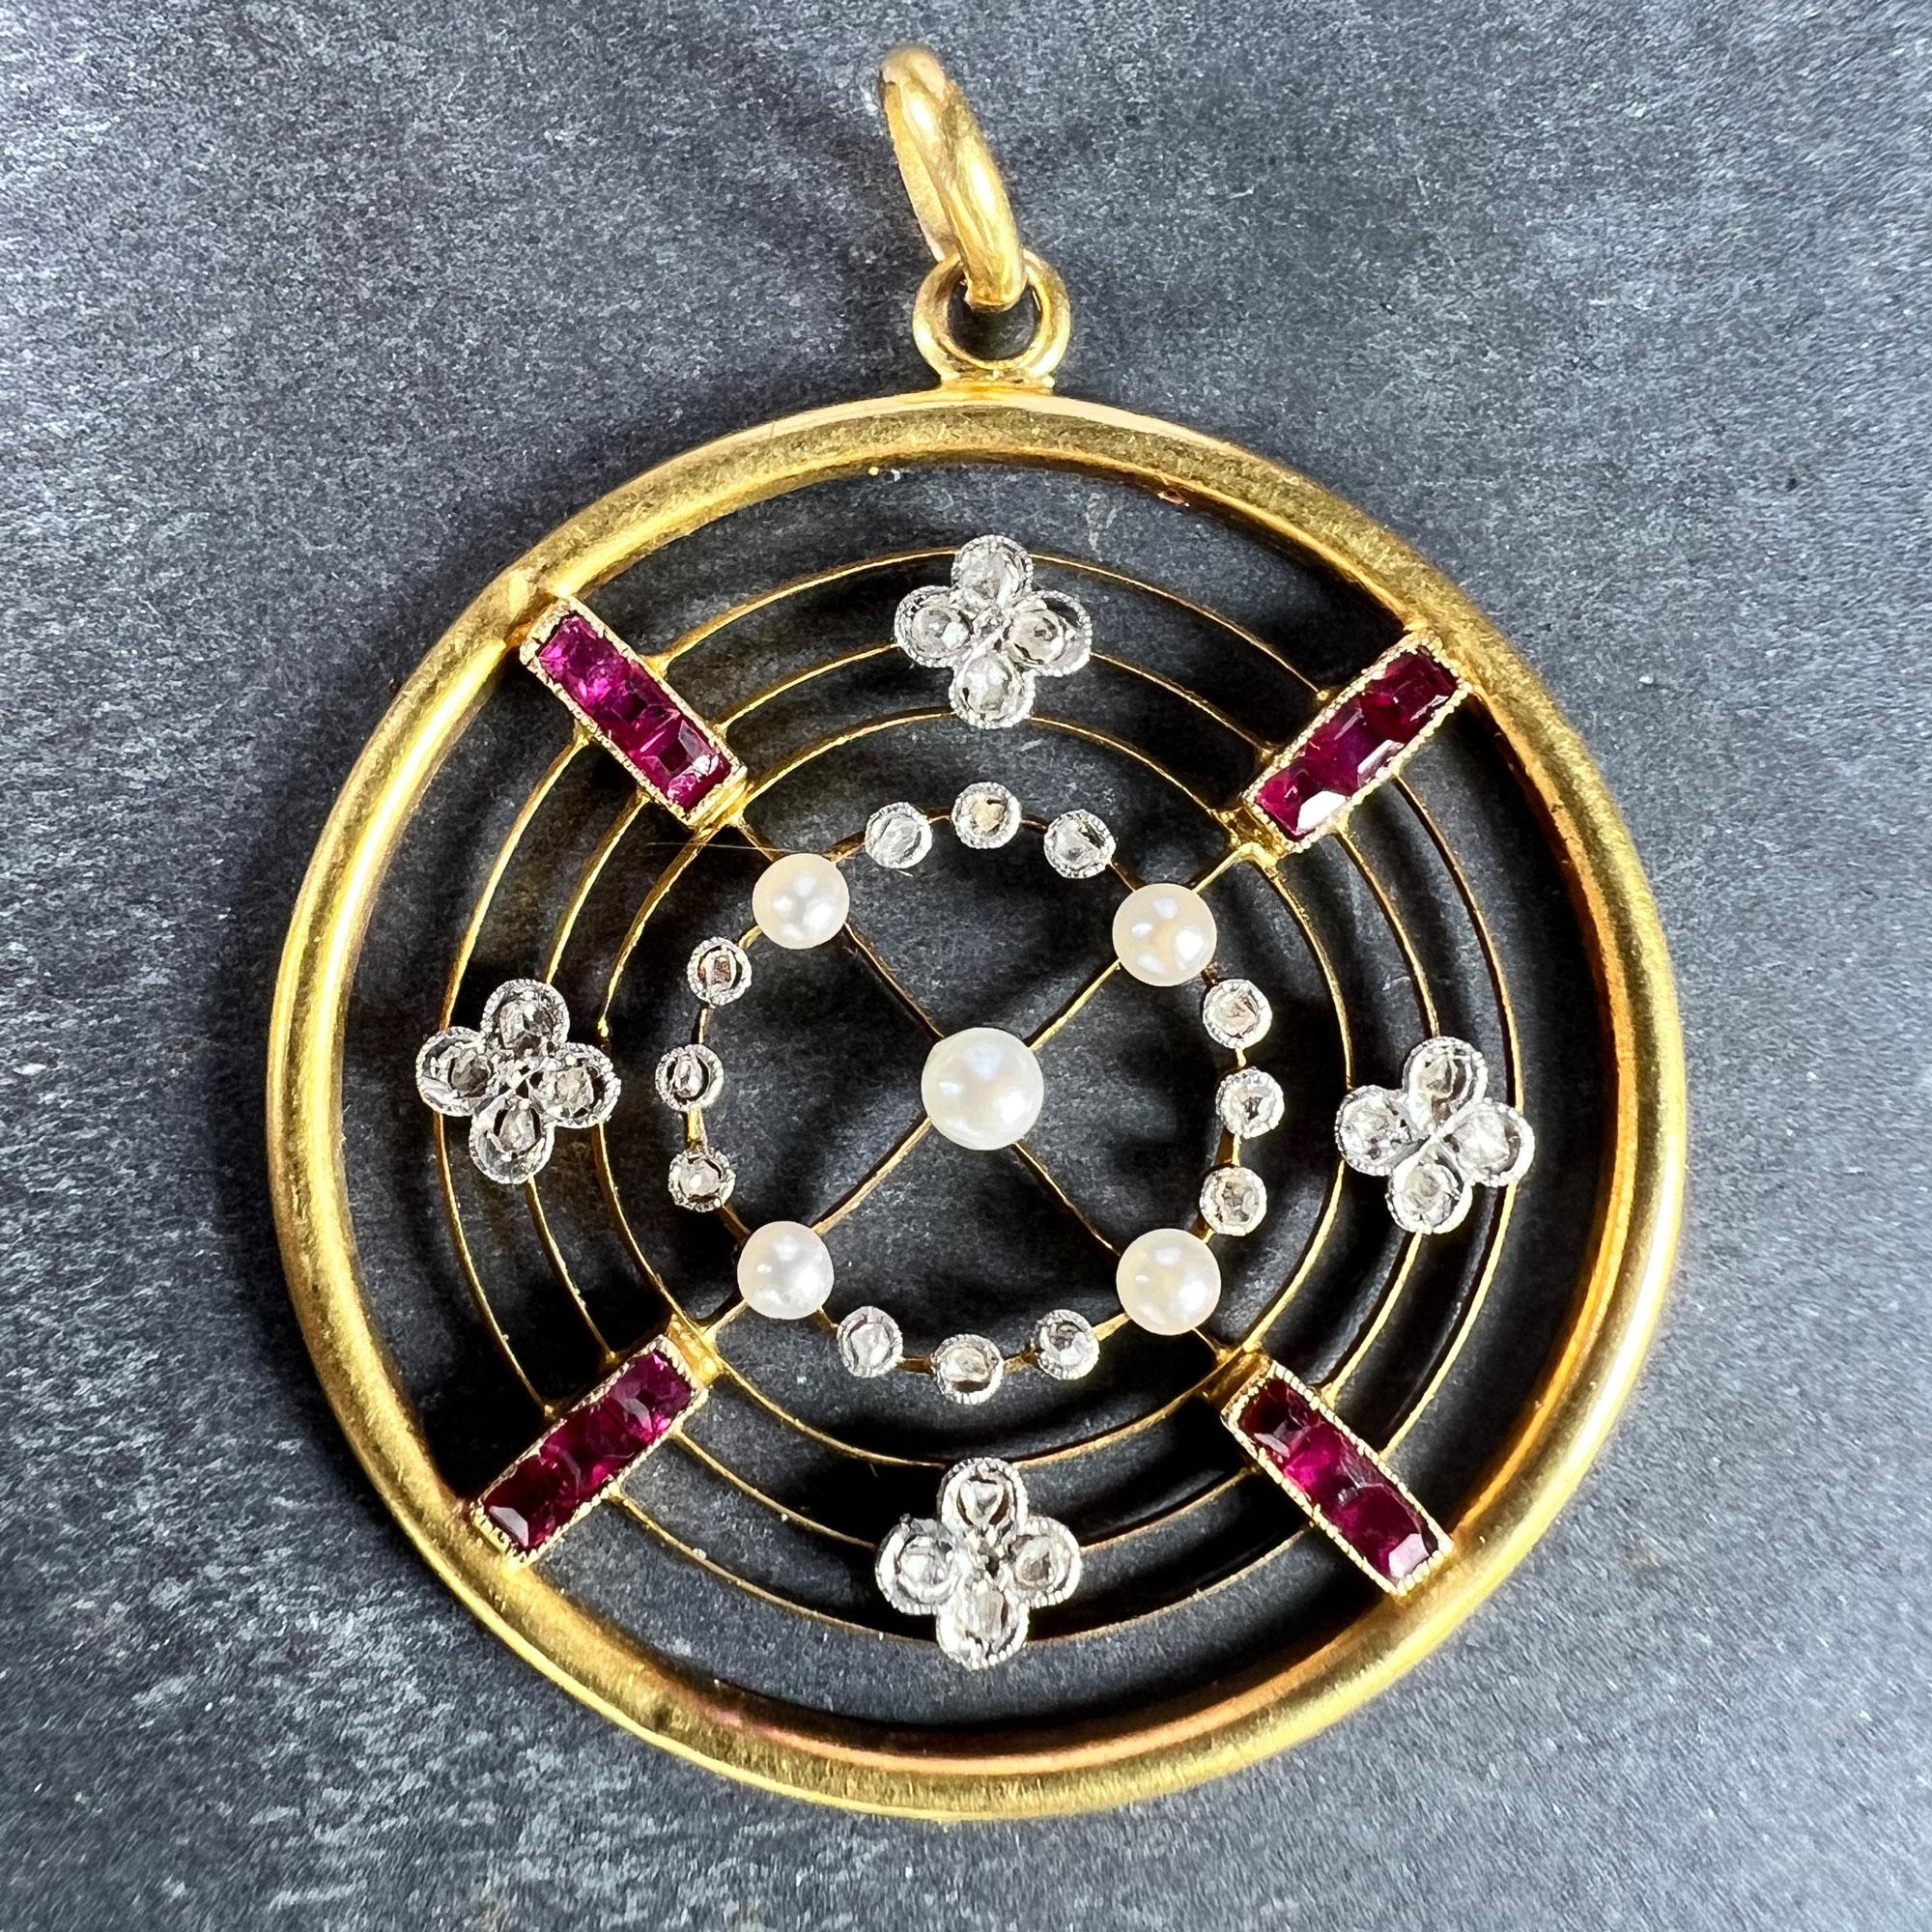 An Edwardian 18 karat (18K) yellow gold pendant designed as a circle with wirework gold crossed lines set with panels of square-cut rubies leading to a natural pearl at the centre. The innermost circle set with four seed pearls each separated by